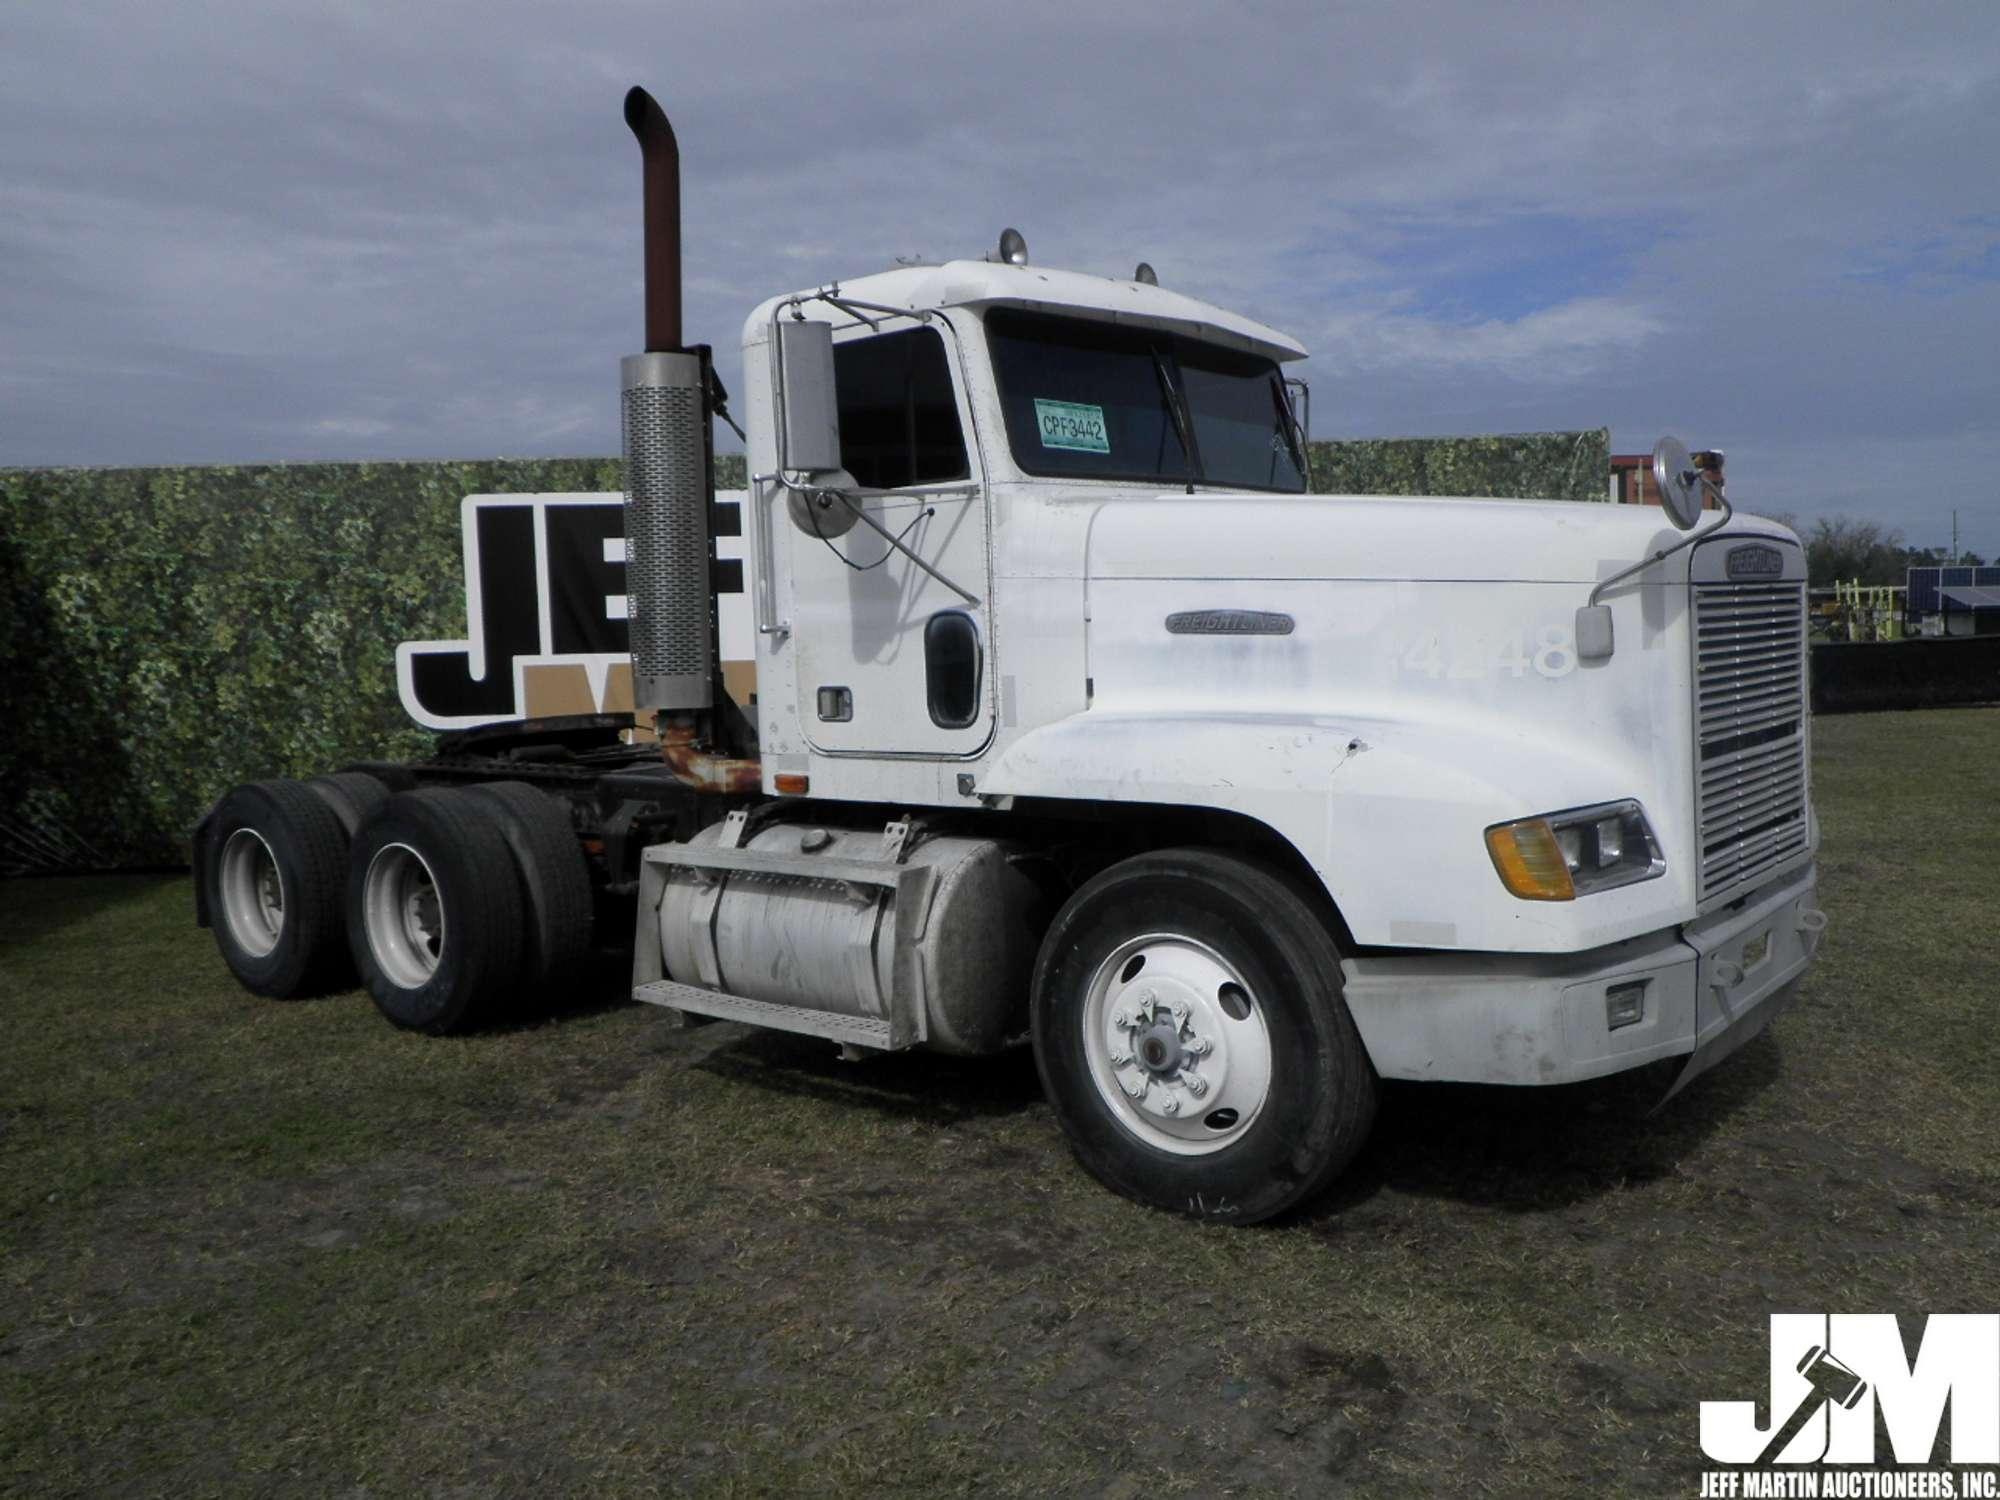 1992 FREIGHTLINER USF-1E VIN: 1FUYDCXB1NH482544